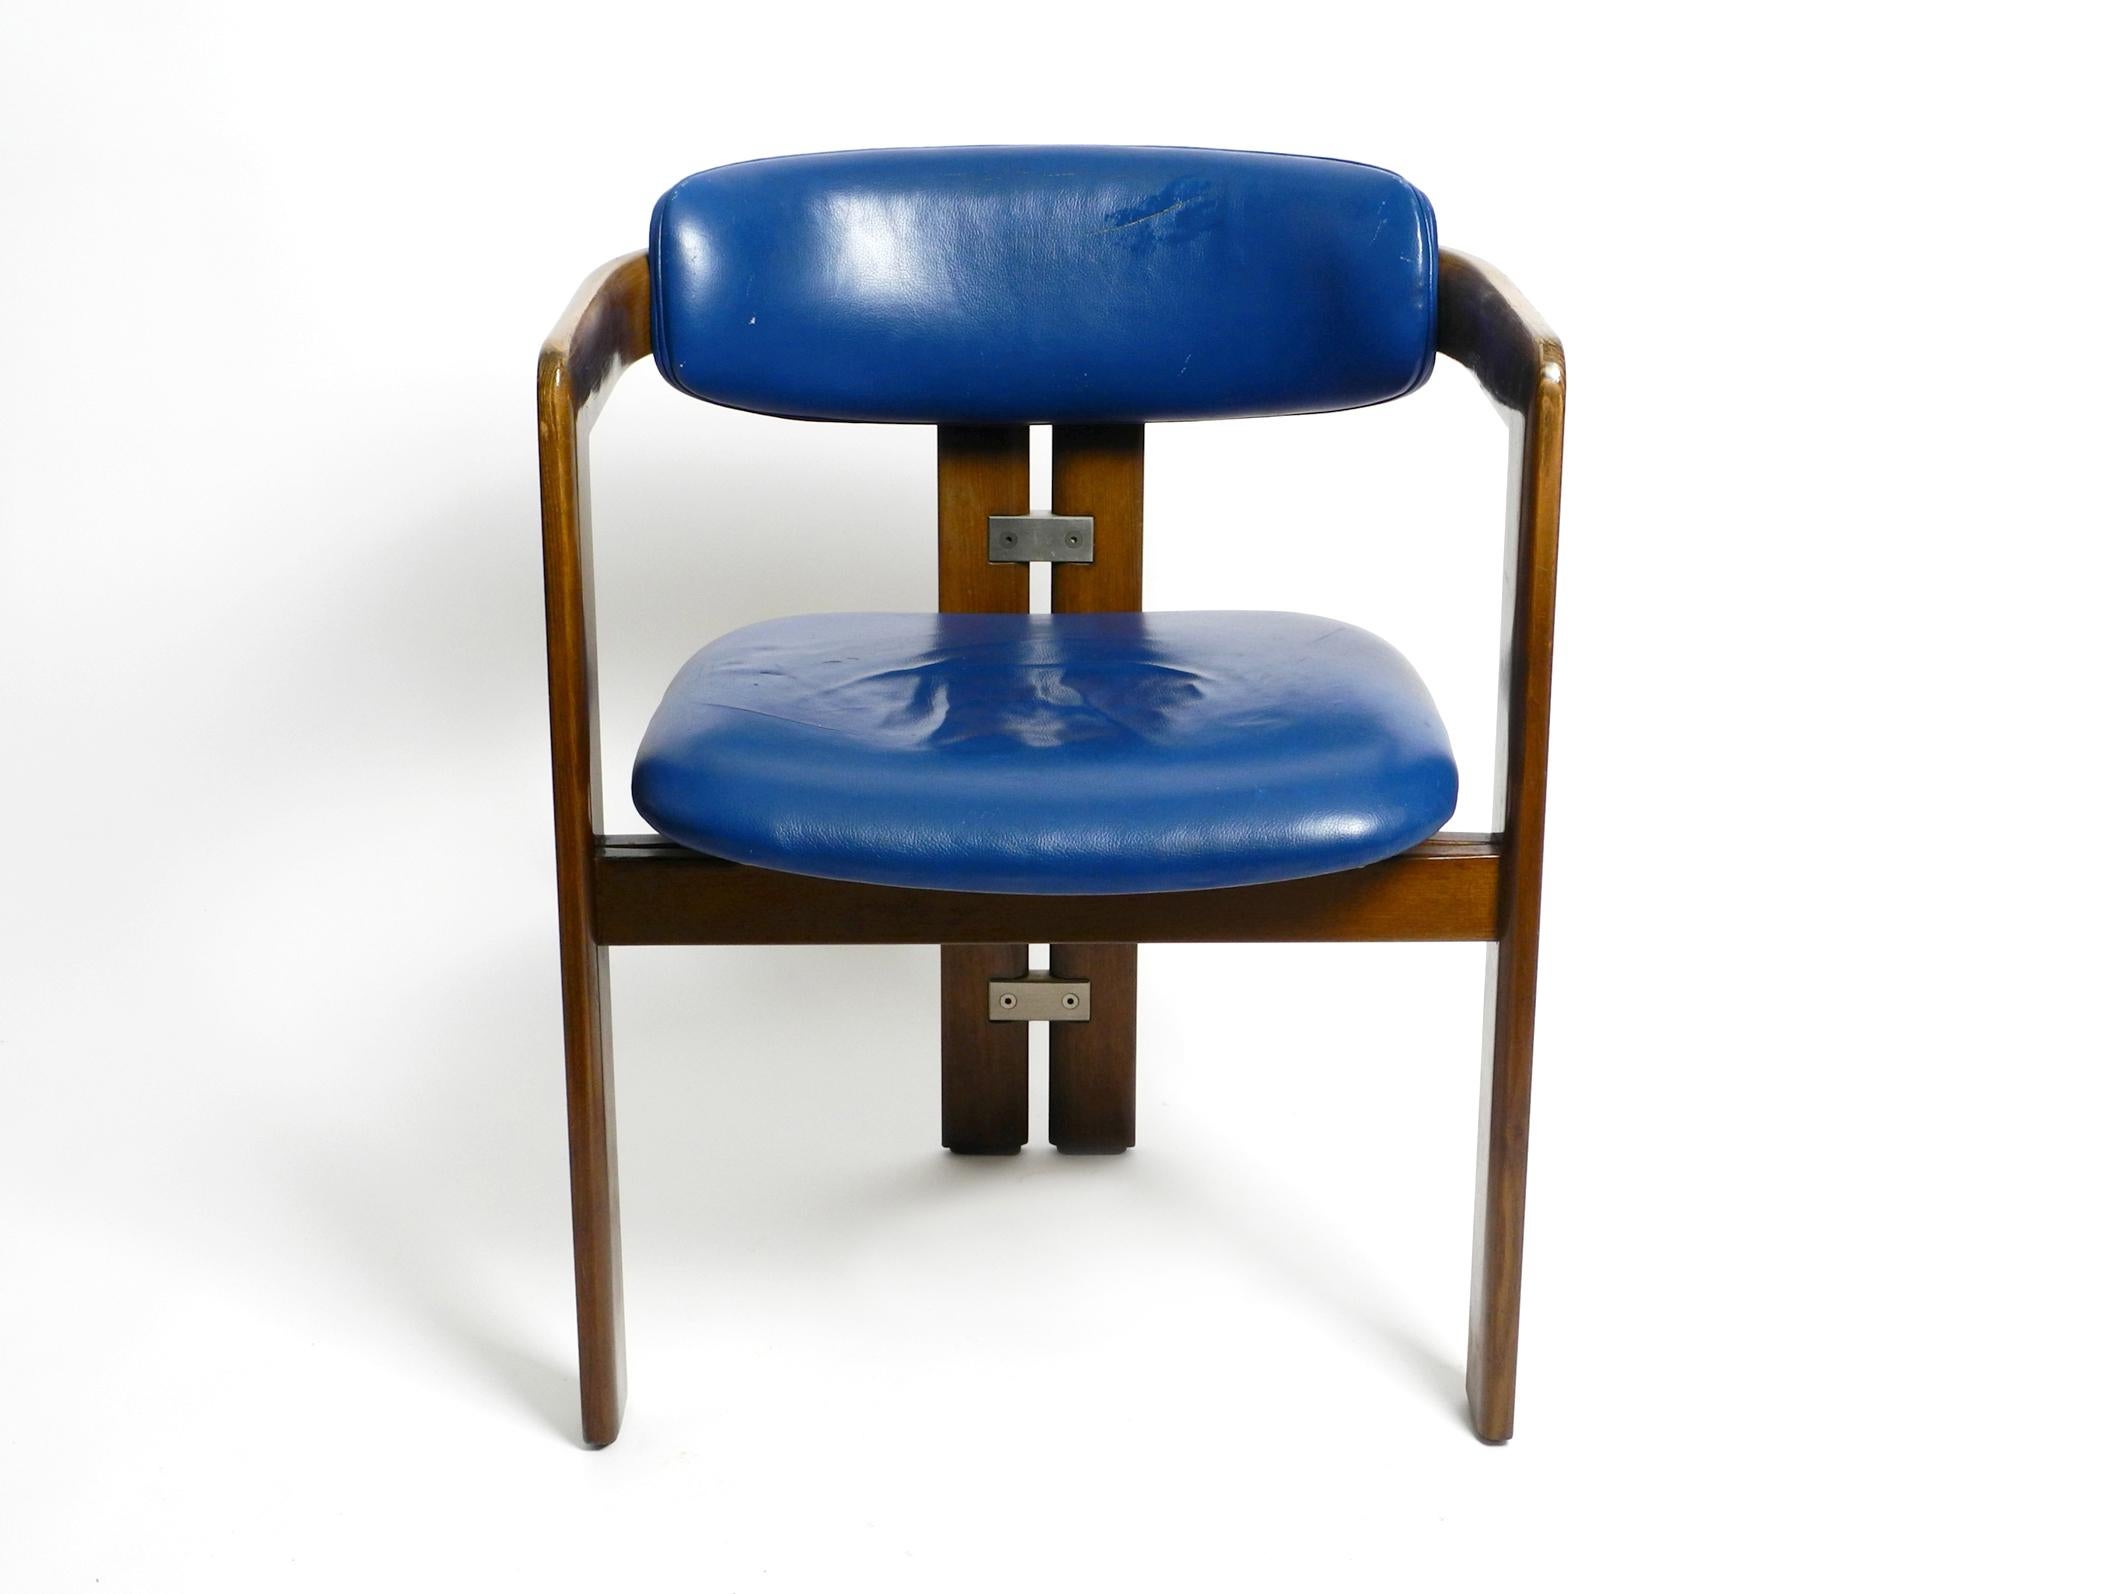 One Pamplona chair by Augusto Savini for Pozzi in rare original blue leather upholstery and solid beech wood. Designed in Italy 1965.
Dark stained beech wood frame. This chair with it's original leather upholstery is from the 1970s.
100% Original